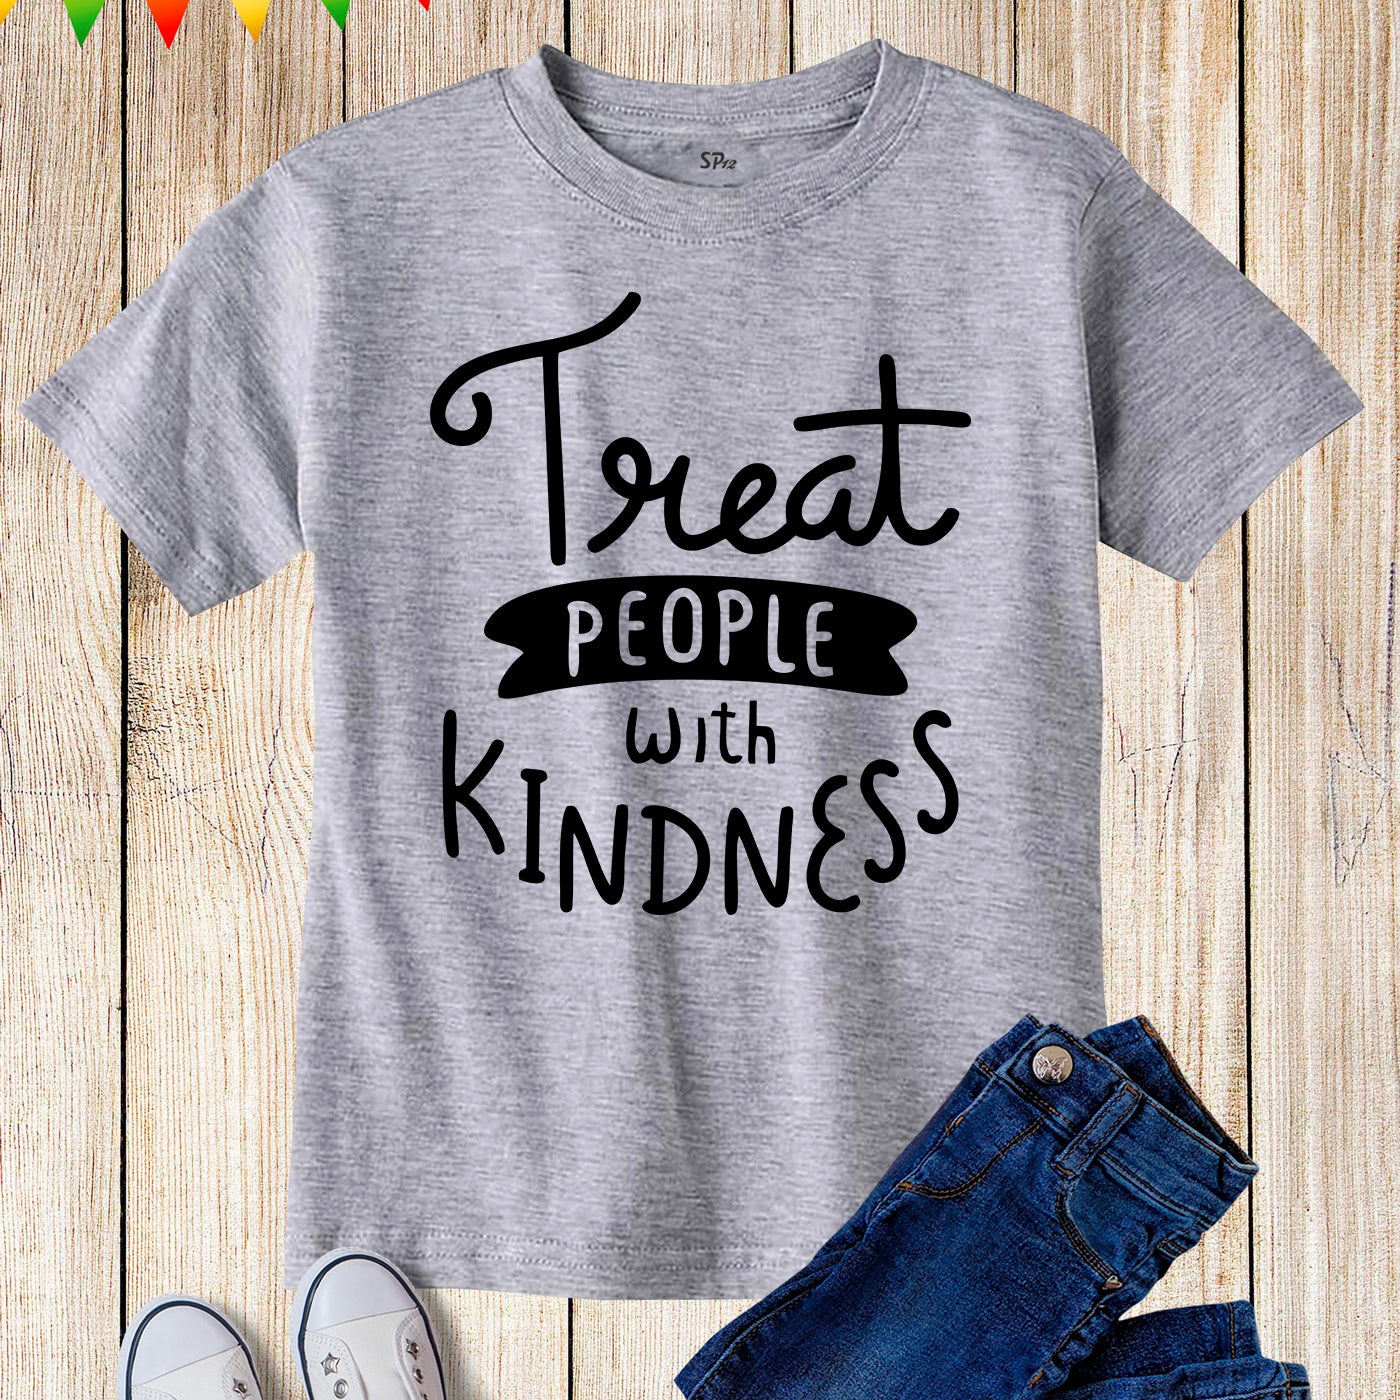 Treat People With Kindness Kids T Shirt Be Kind Motivational Tee